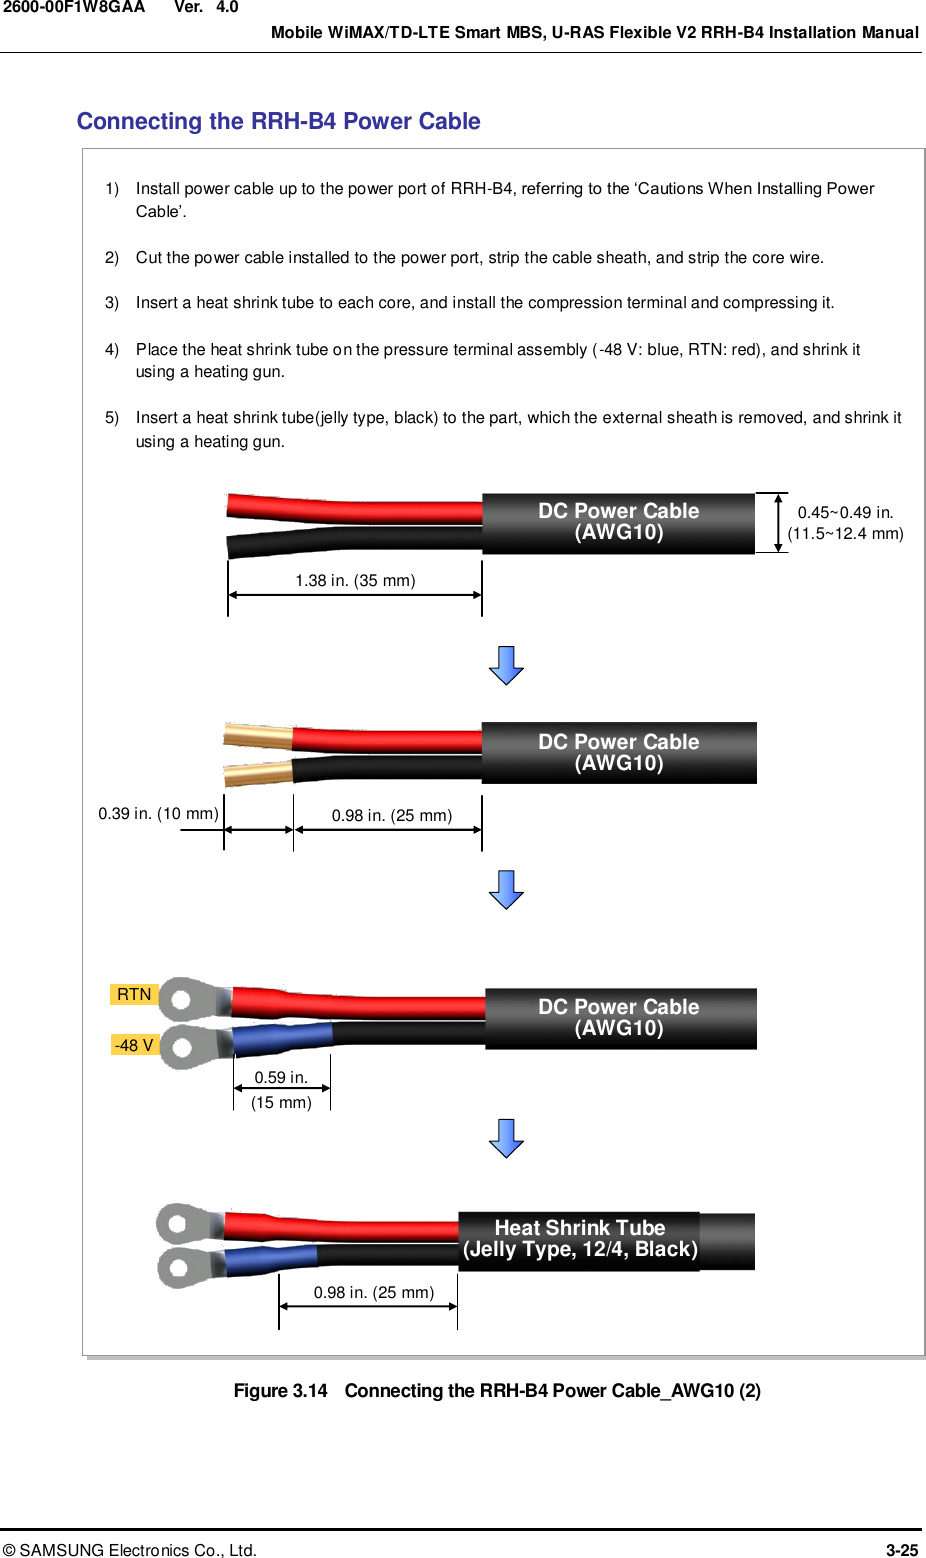  Ver.    Mobile WiMAX/TD-LTE Smart MBS, U-RAS Flexible V2 RRH-B4 Installation Manual ©  SAMSUNG Electronics Co., Ltd.  3-25 2600-00F1W8GAA 4.0 Connecting the RRH-B4 Power Cable Figure 3.14  Connecting the RRH-B4 Power Cable_AWG10 (2)  1)    Install power cable up to the power port of RRH-B4, referring to the ‘Cautions When Installing Power Cable’.  2)    Cut the power cable installed to the power port, strip the cable sheath, and strip the core wire.  3)    Insert a heat shrink tube to each core, and install the compression terminal and compressing it.  4)    Place the heat shrink tube on the pressure terminal assembly (-48 V: blue, RTN: red), and shrink it using a heating gun.  5)    Insert a heat shrink tube(jelly type, black) to the part, which the external sheath is removed, and shrink it using a heating gun. DC Power Cable (AWG10) 0.45~0.49 in. (11.5~12.4 mm) 1.38 in. (35 mm) 0.59 in. (15 mm) RTN -48 V 0.98 in. (25 mm) 0.39 in. (10 mm) Heat Shrink Tube (Jelly Type, 12/4, Black) 0.98 in. (25 mm) DC Power Cable (AWG10) DC Power Cable (AWG10) 